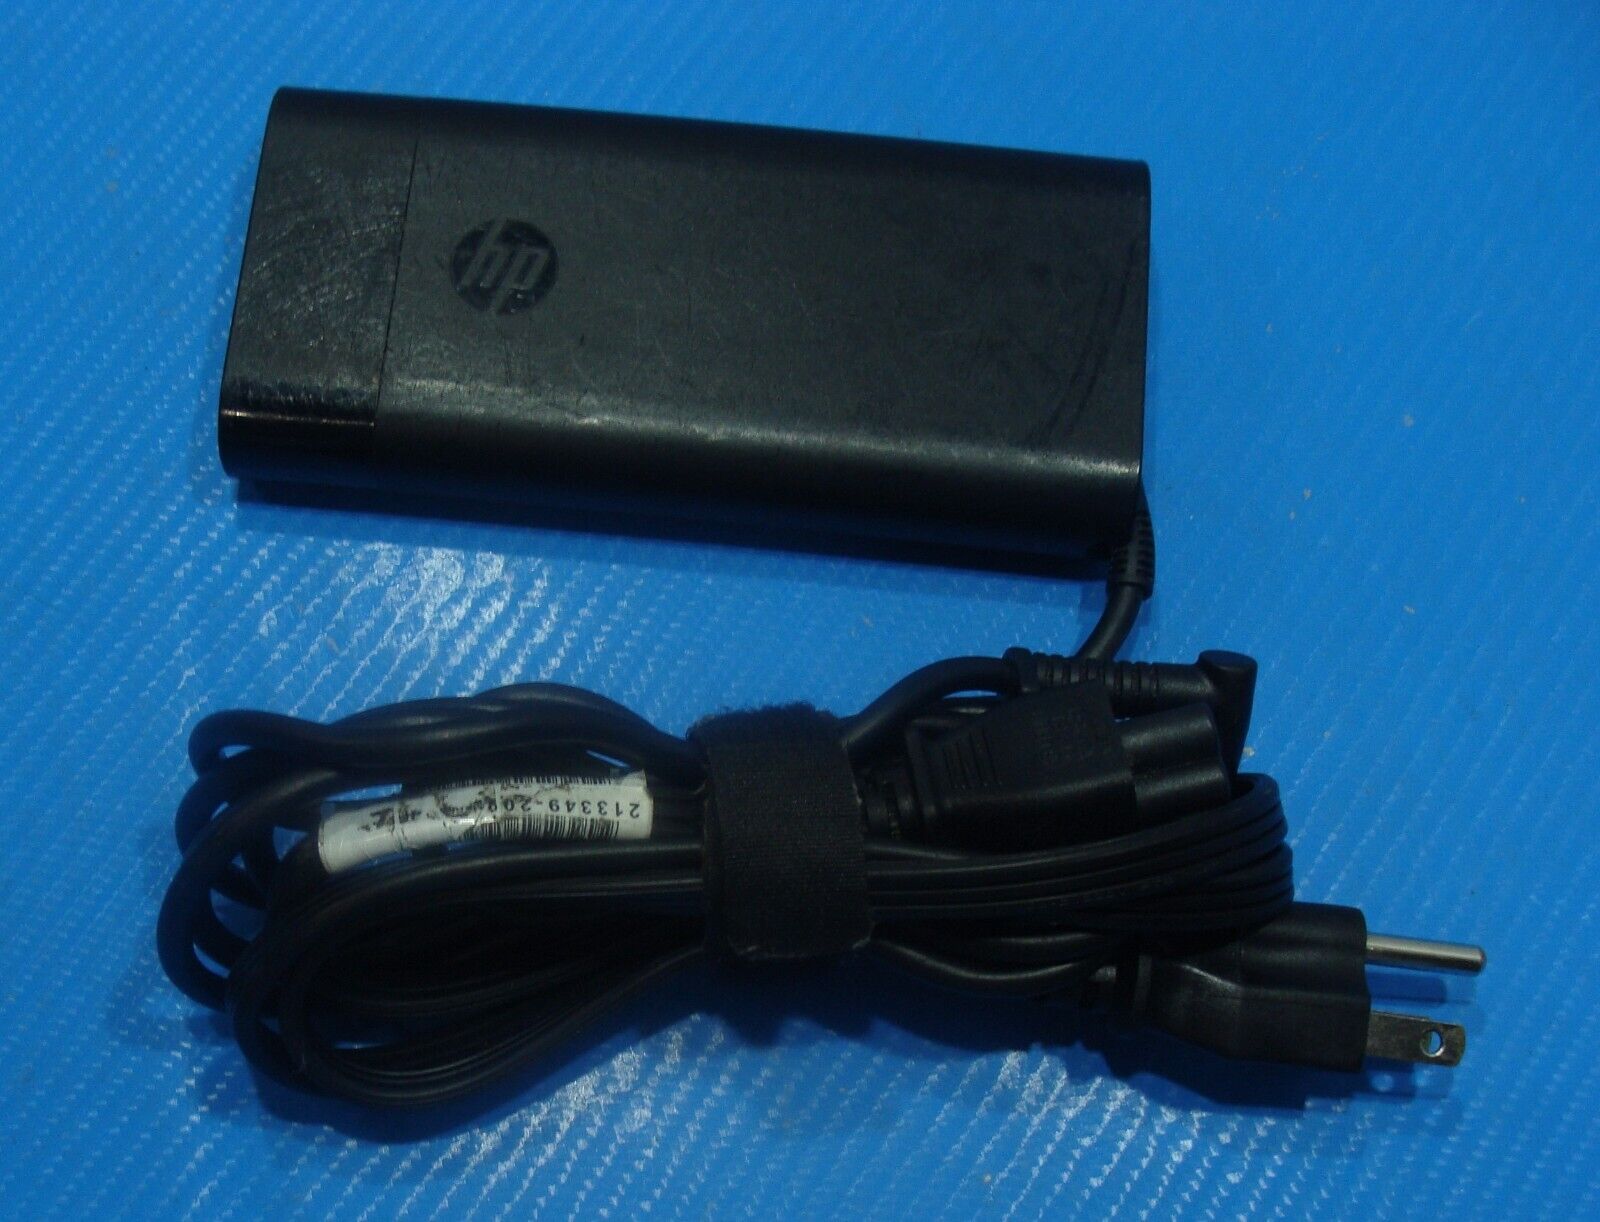 Genuine OEM HP 150W TPN-DA09 L48757-003 AC Power Adapter Charger with Power Cord